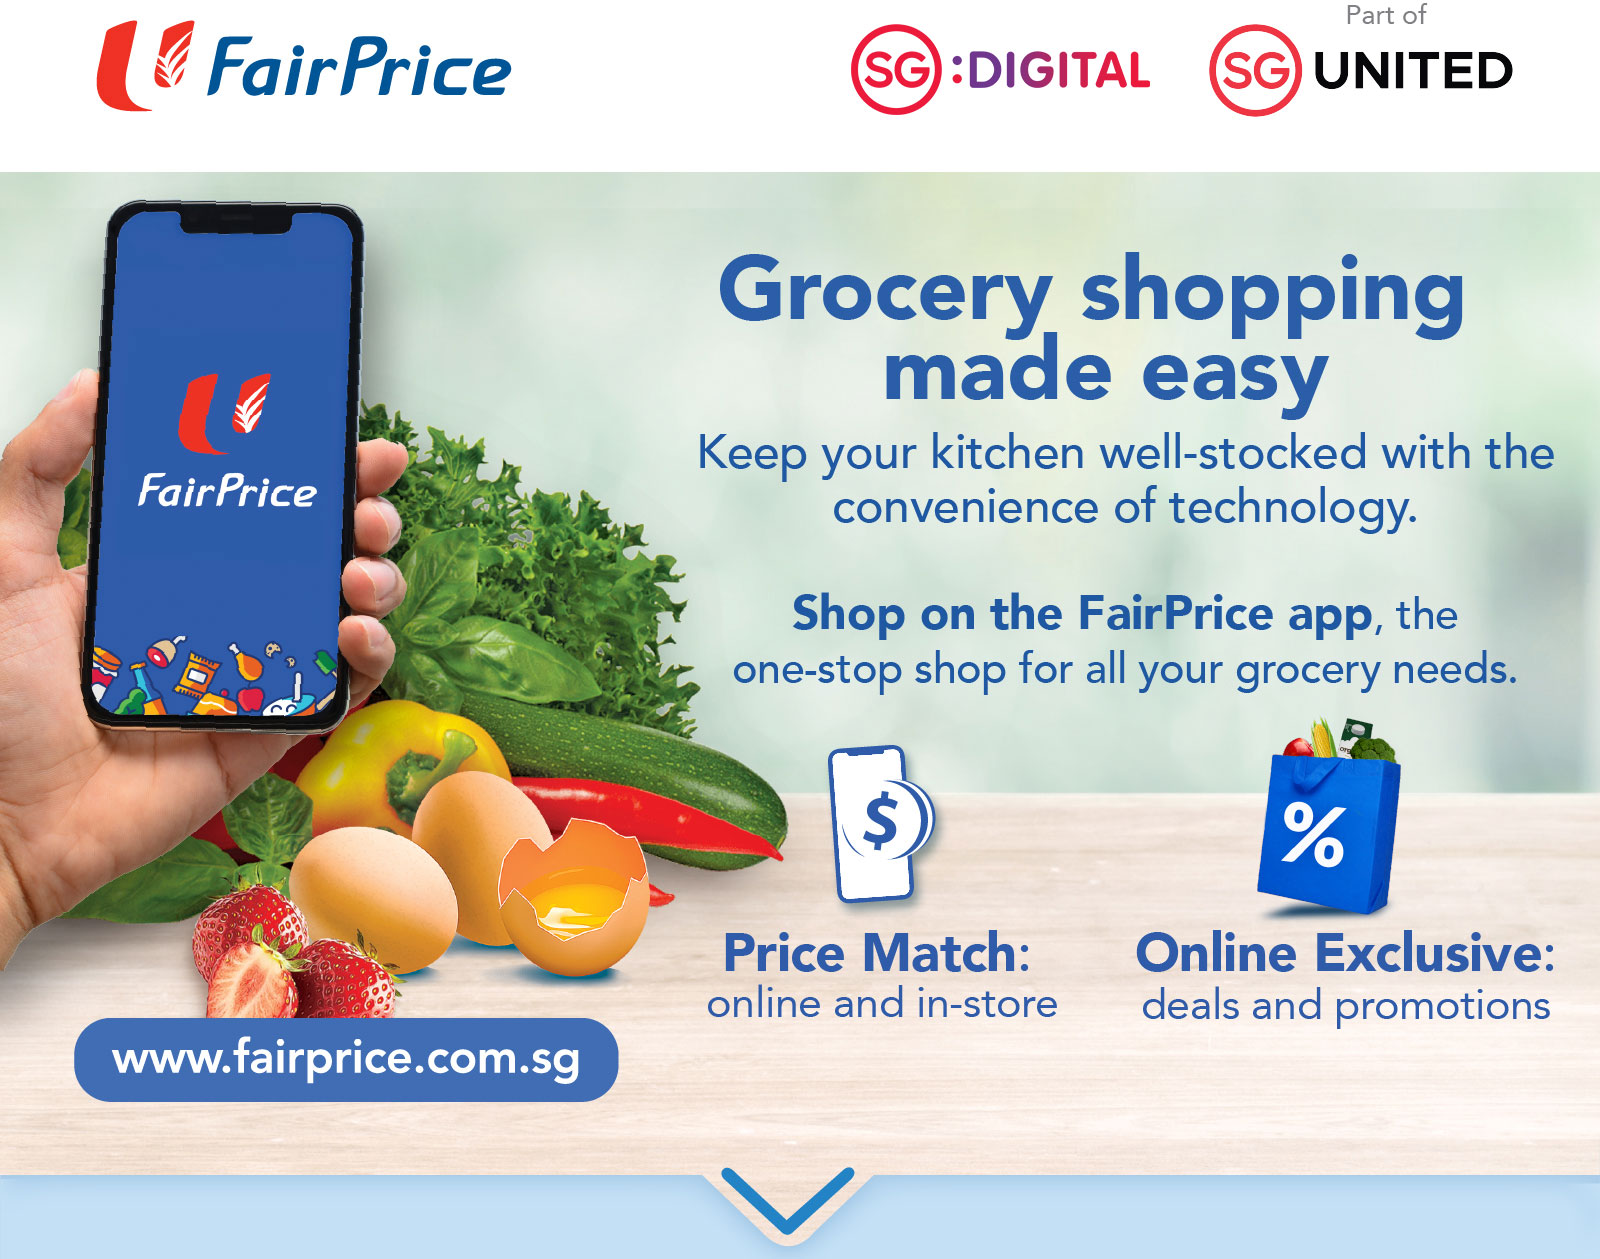 Seniors go digital - Grocery shopping made easy with FairPrice app